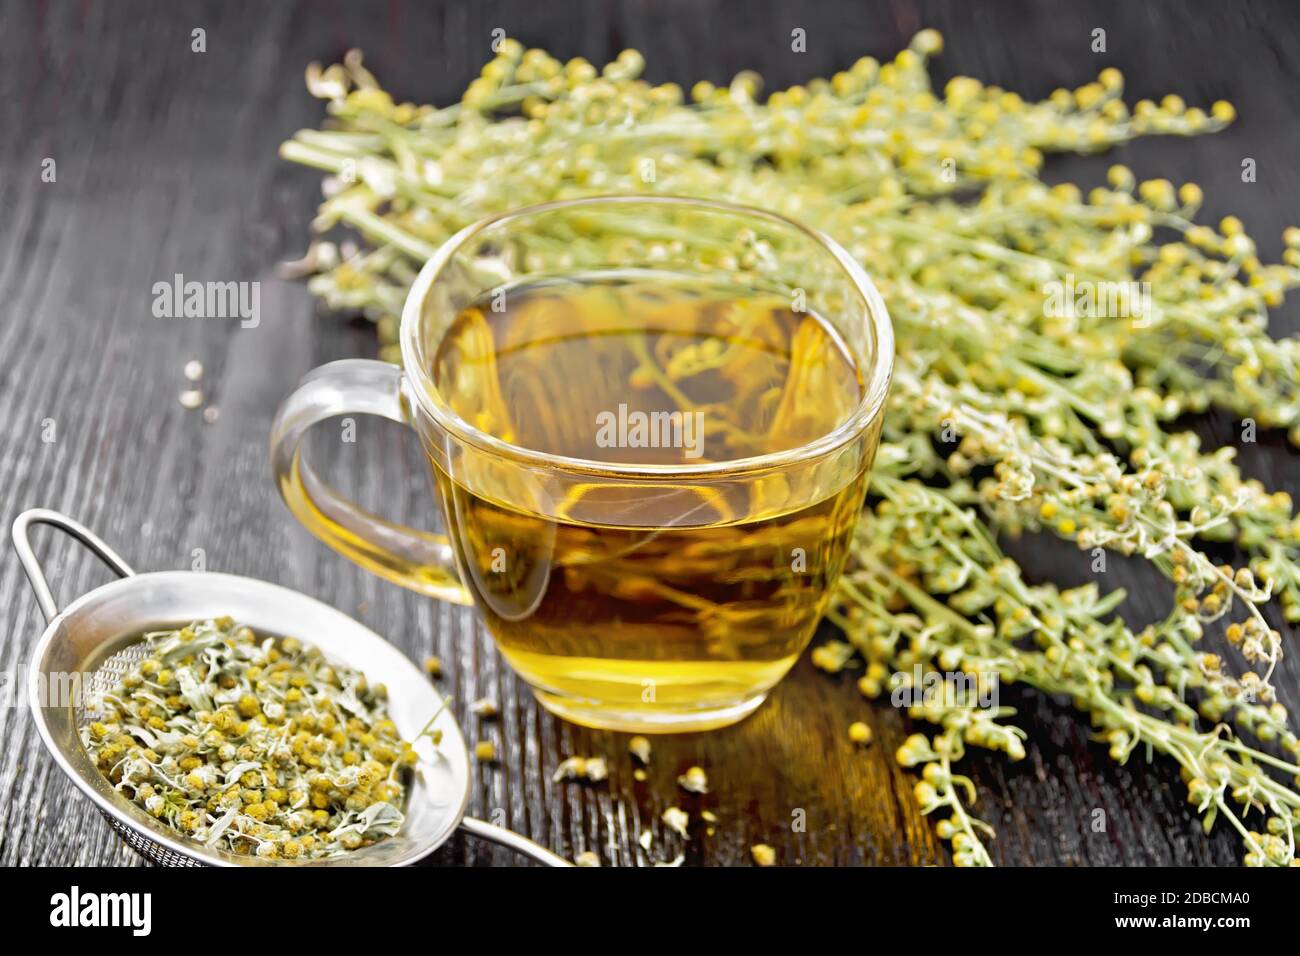 Gray wormwood herbal tea in a glass cup, fresh flowers and metal strainer with dried flowers sagebrush on wooden board background Stock Photo